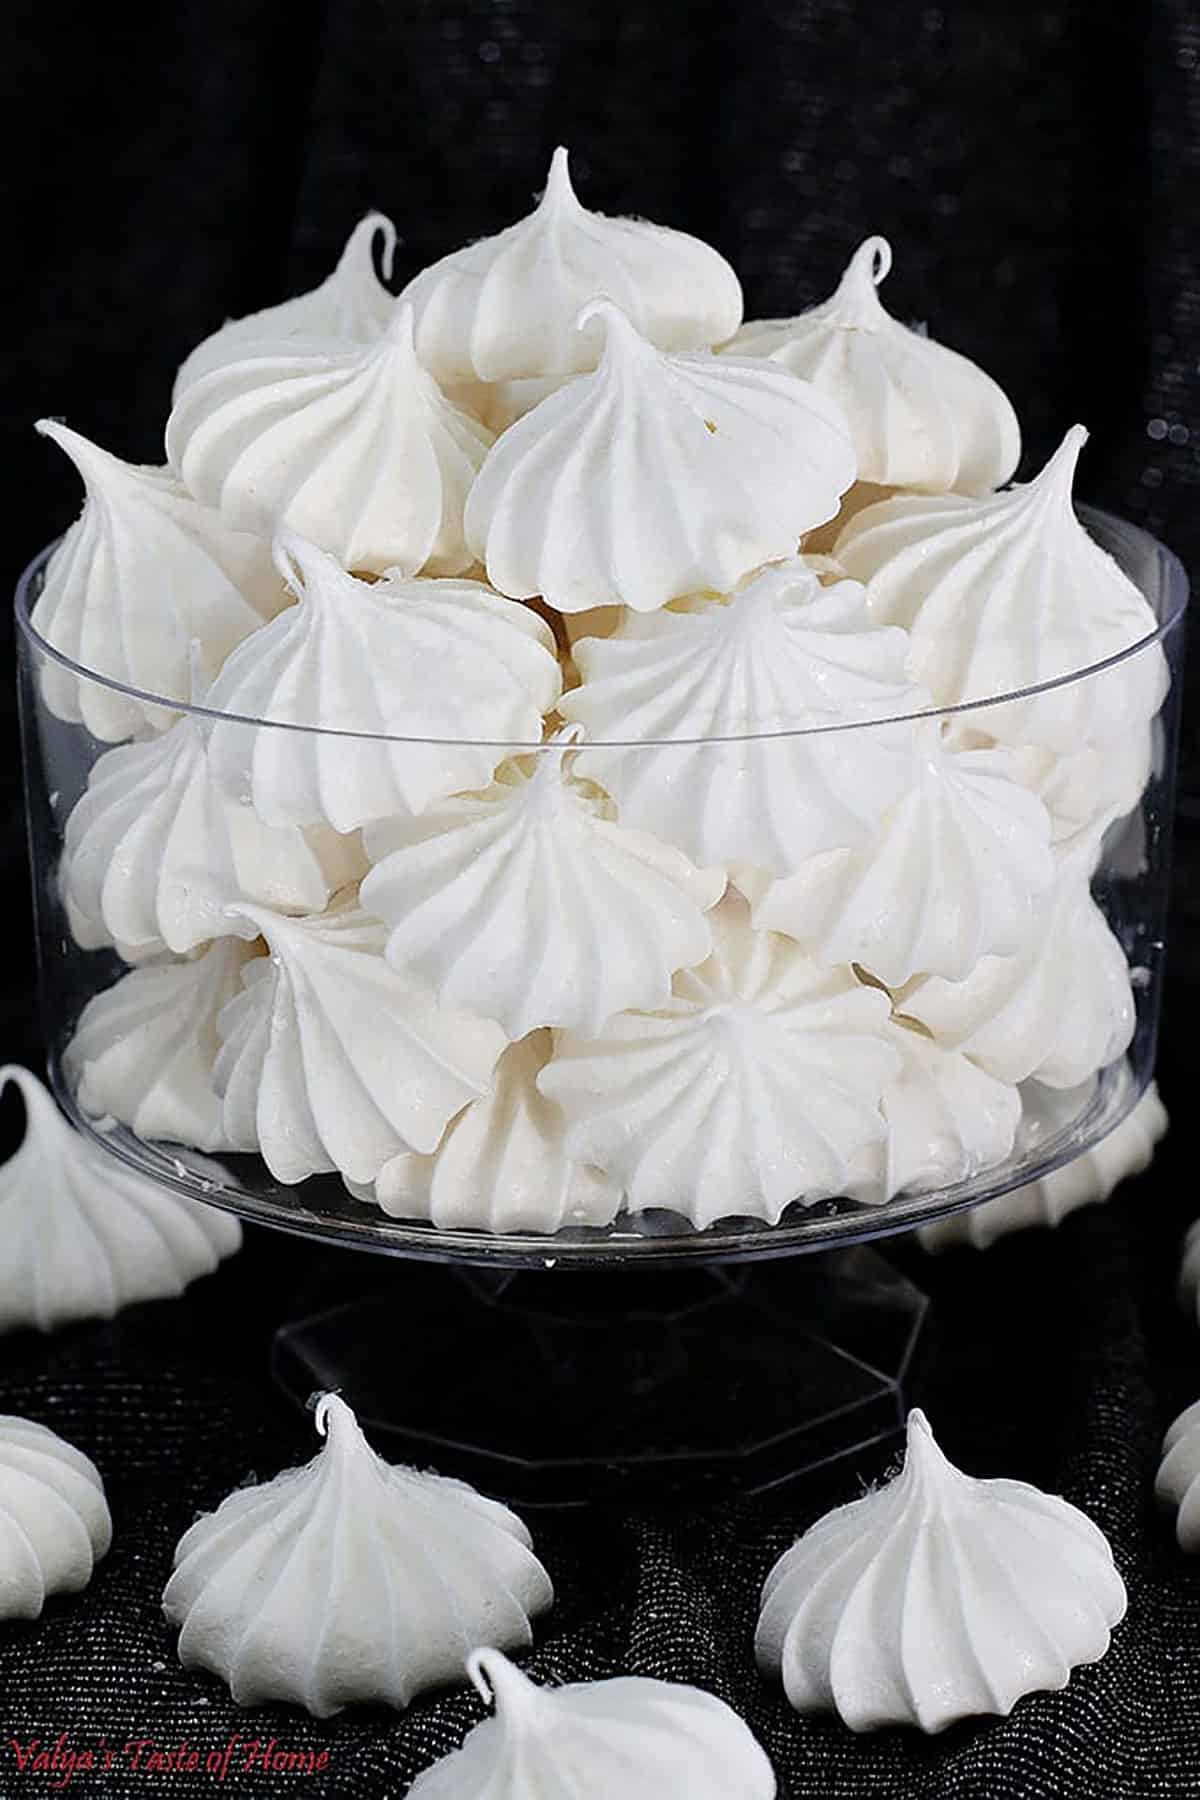 This classic recipe for Meringue Cookies will give you the perfect ones that are light, perfectly sweet, and look absolutely perfect for the holidays, especially Christmas!